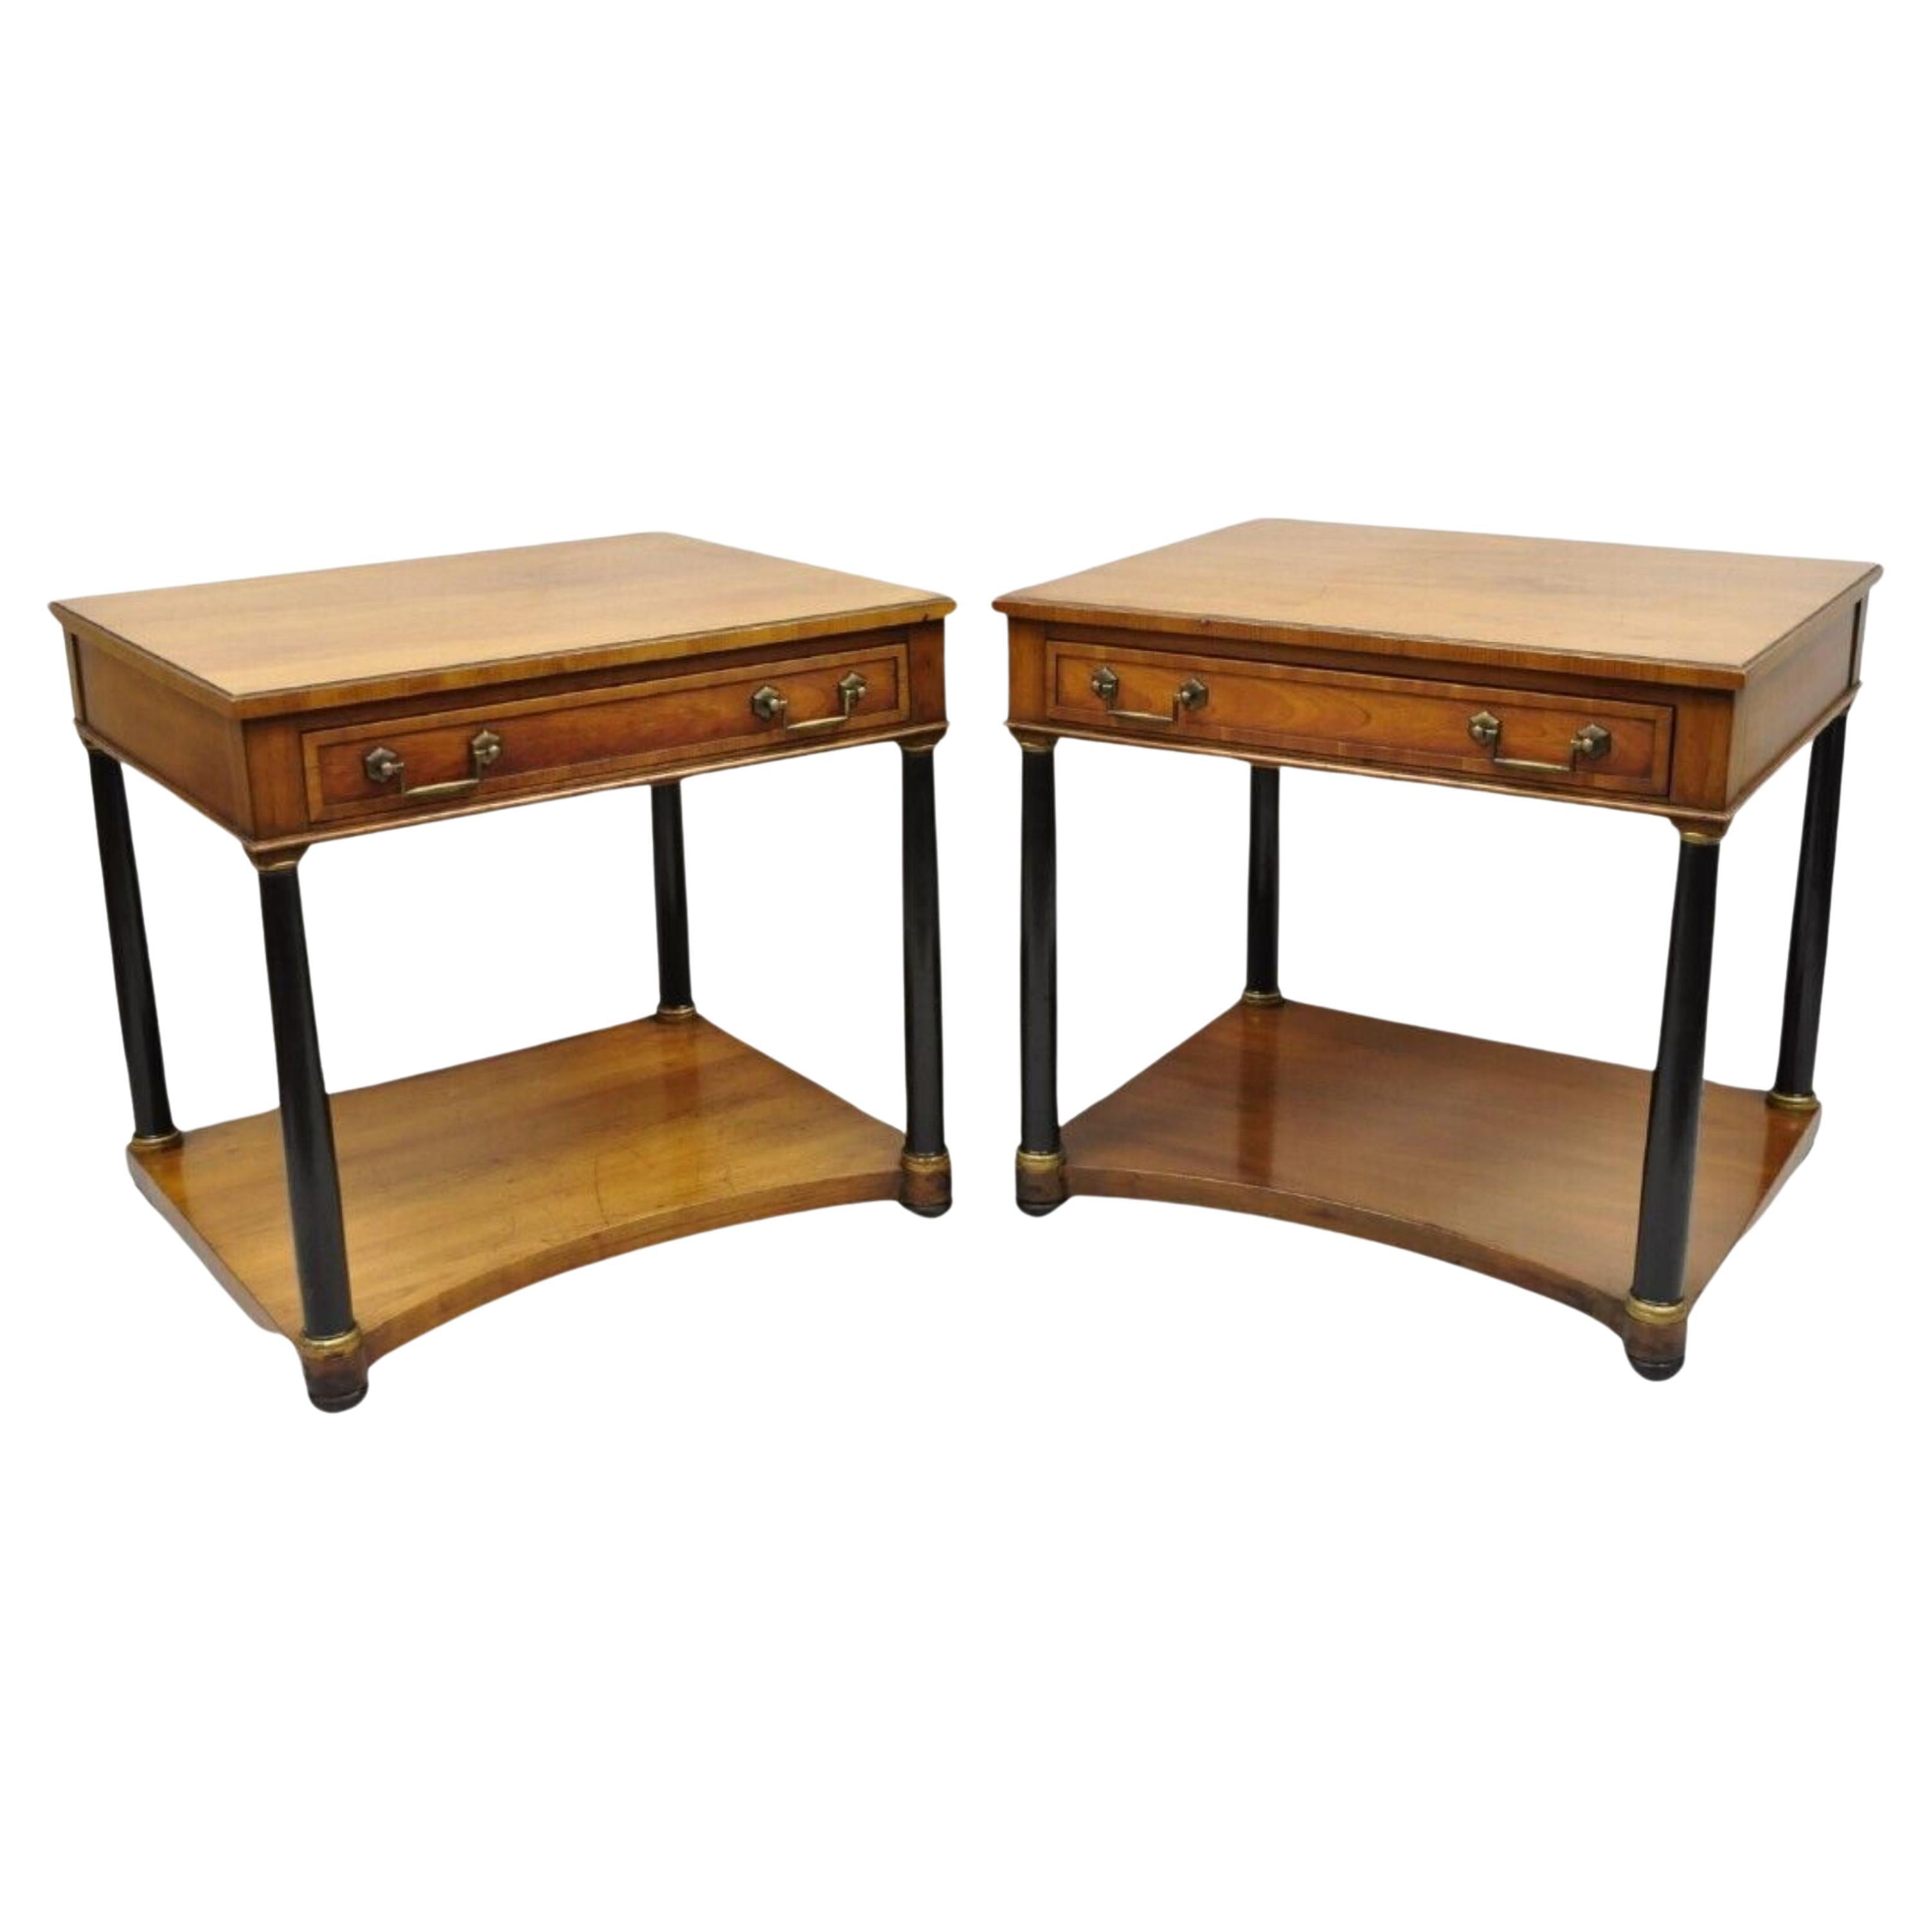 Century French Empire Style Cherry Wood Black Column 1 Drawer End Tables - Pair For Sale